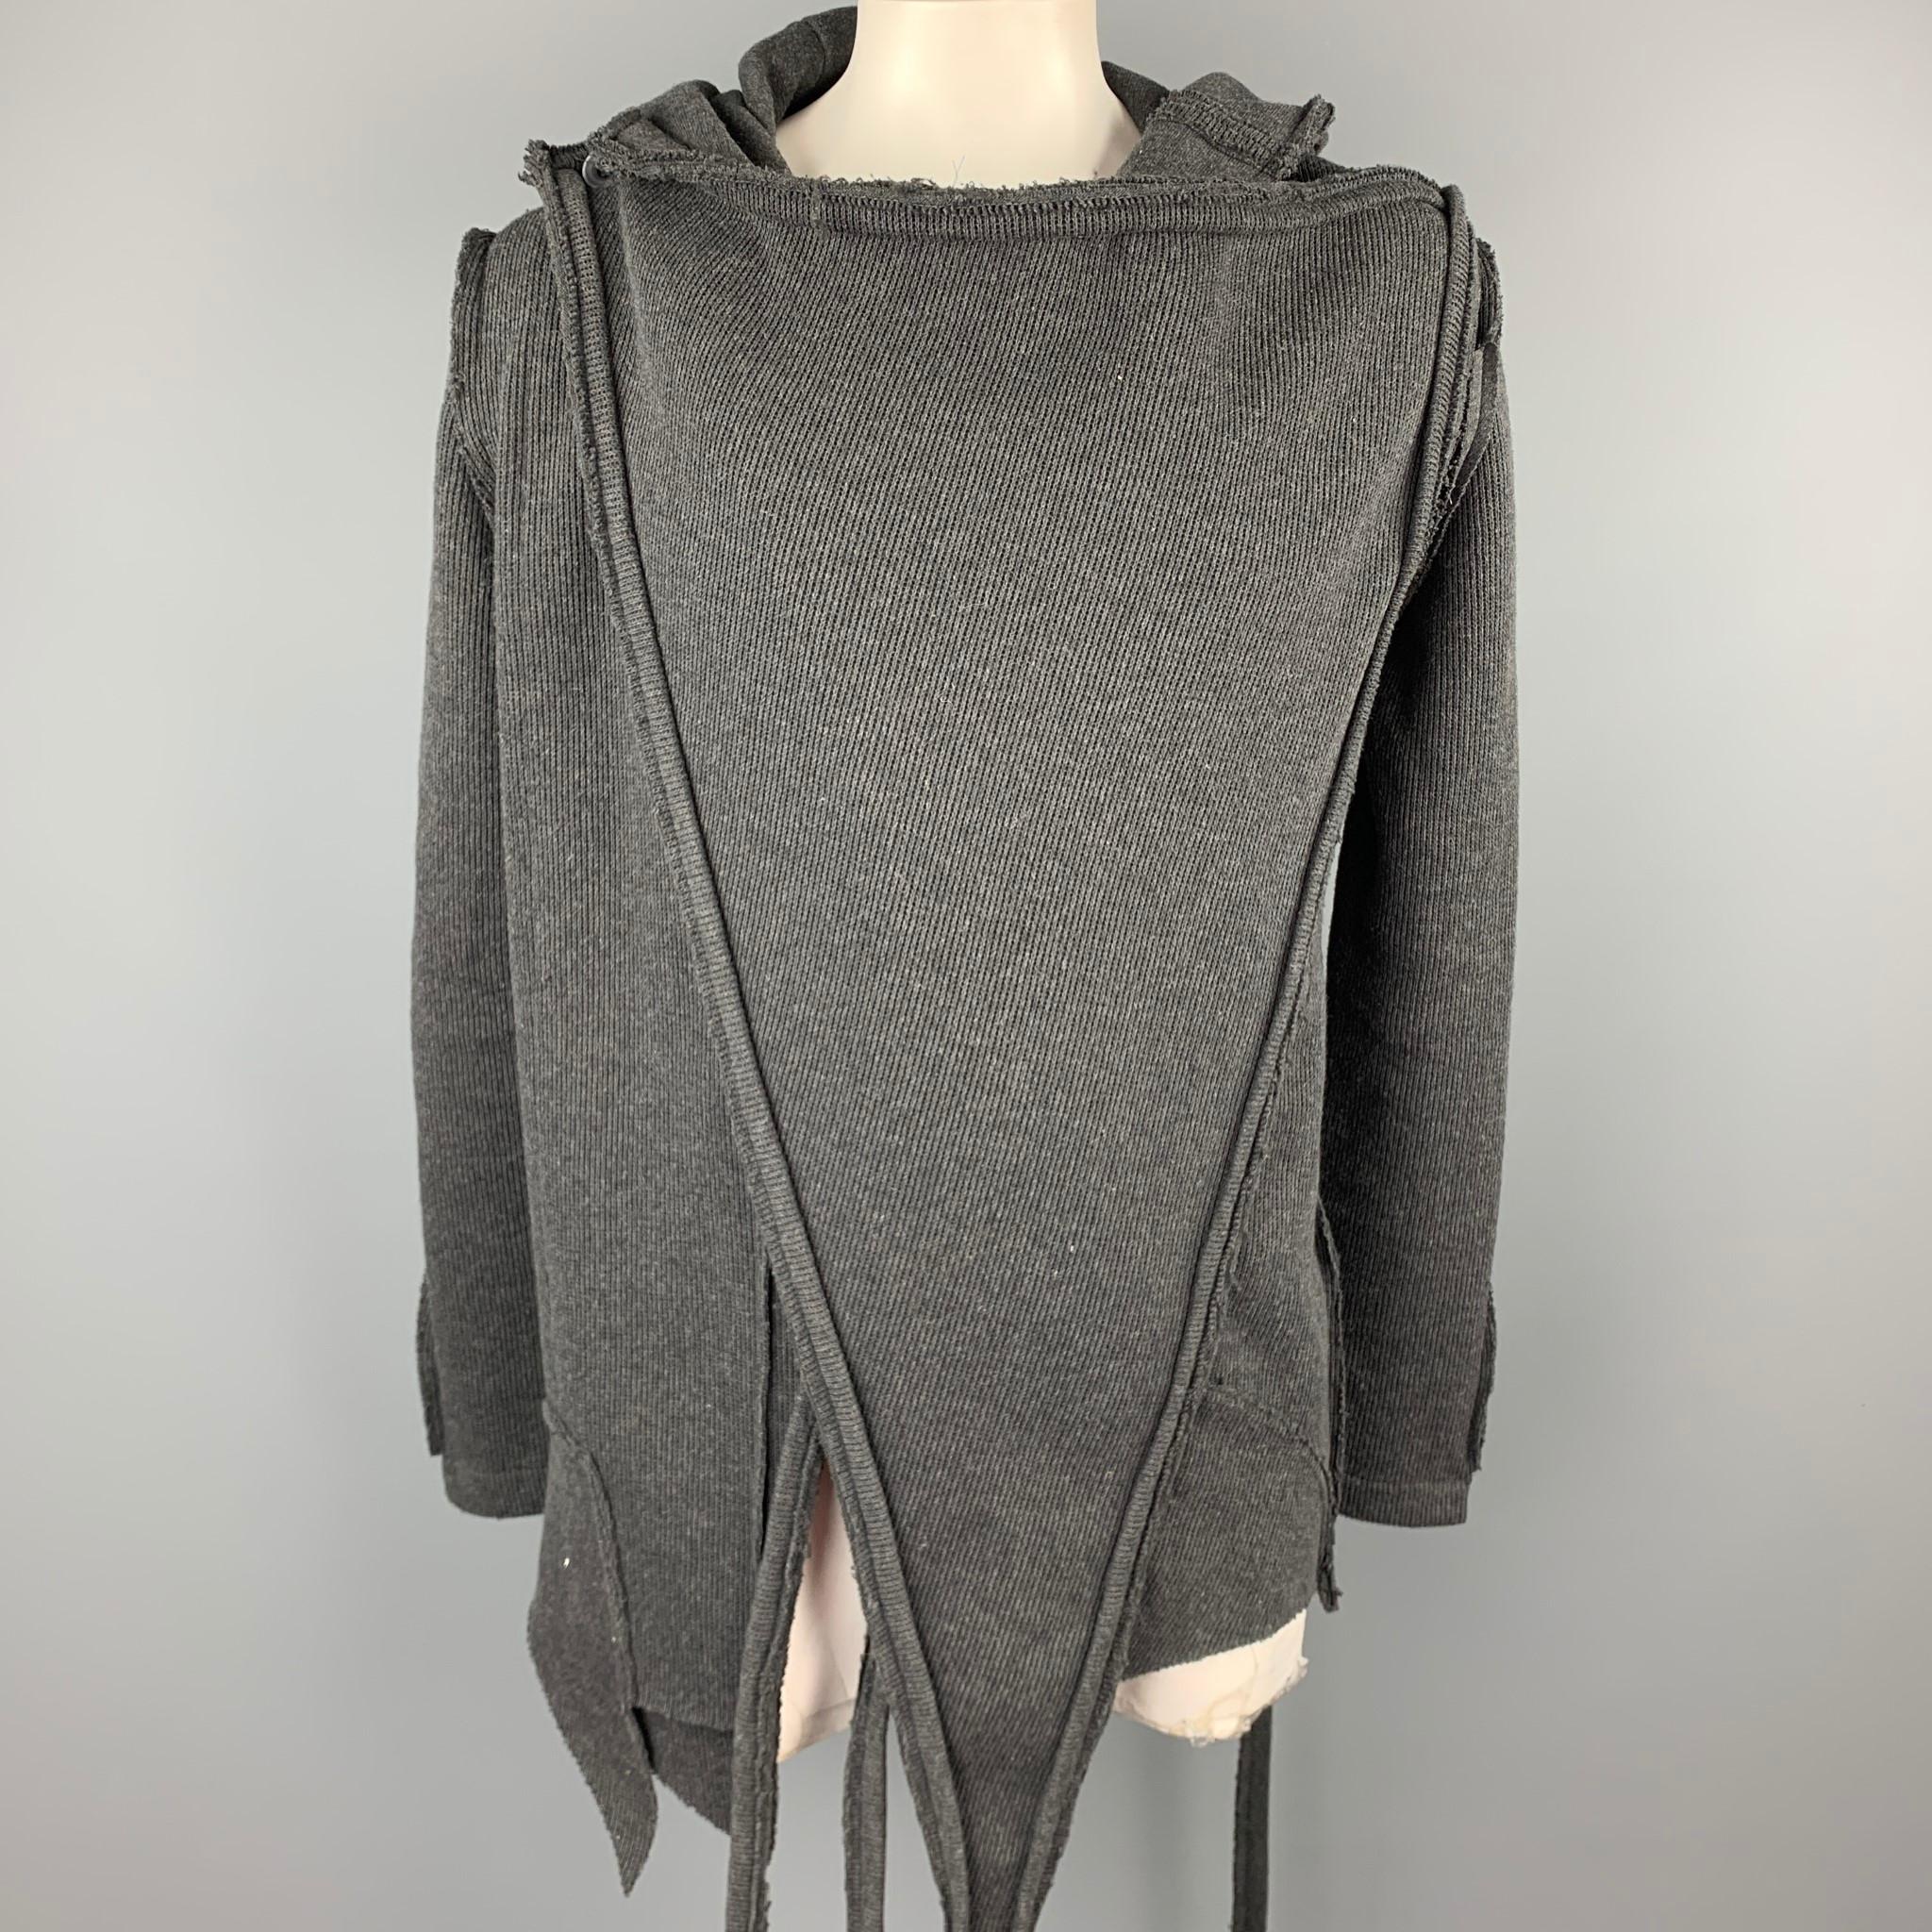 ISSI coat comes in a charcoal ribbed cotton featuring an asymmetrical design, raw hem, long strap details, hooded, and a button closure.

Very Good Pre-Owned Condition.
Marked: 3

Measurements:

Shoulder: 19 in. 
Chest: 44 in. 
Sleeve: 28 in.